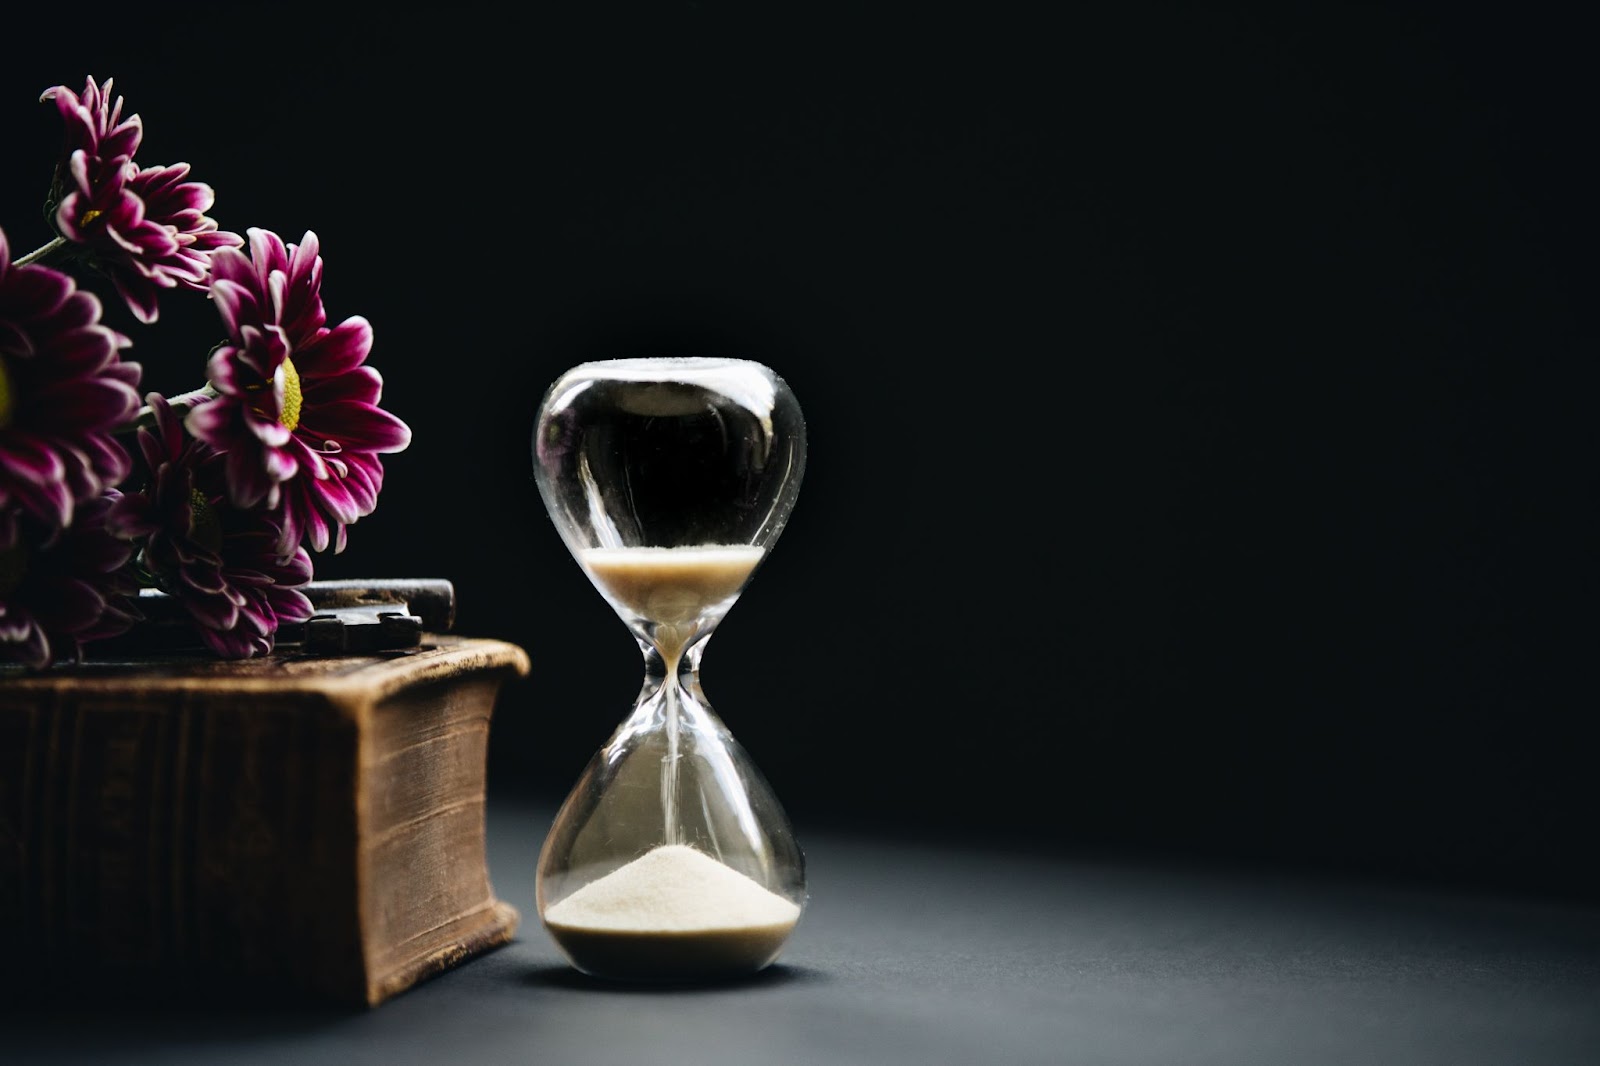 Hourglass next to a bouquet of flowers